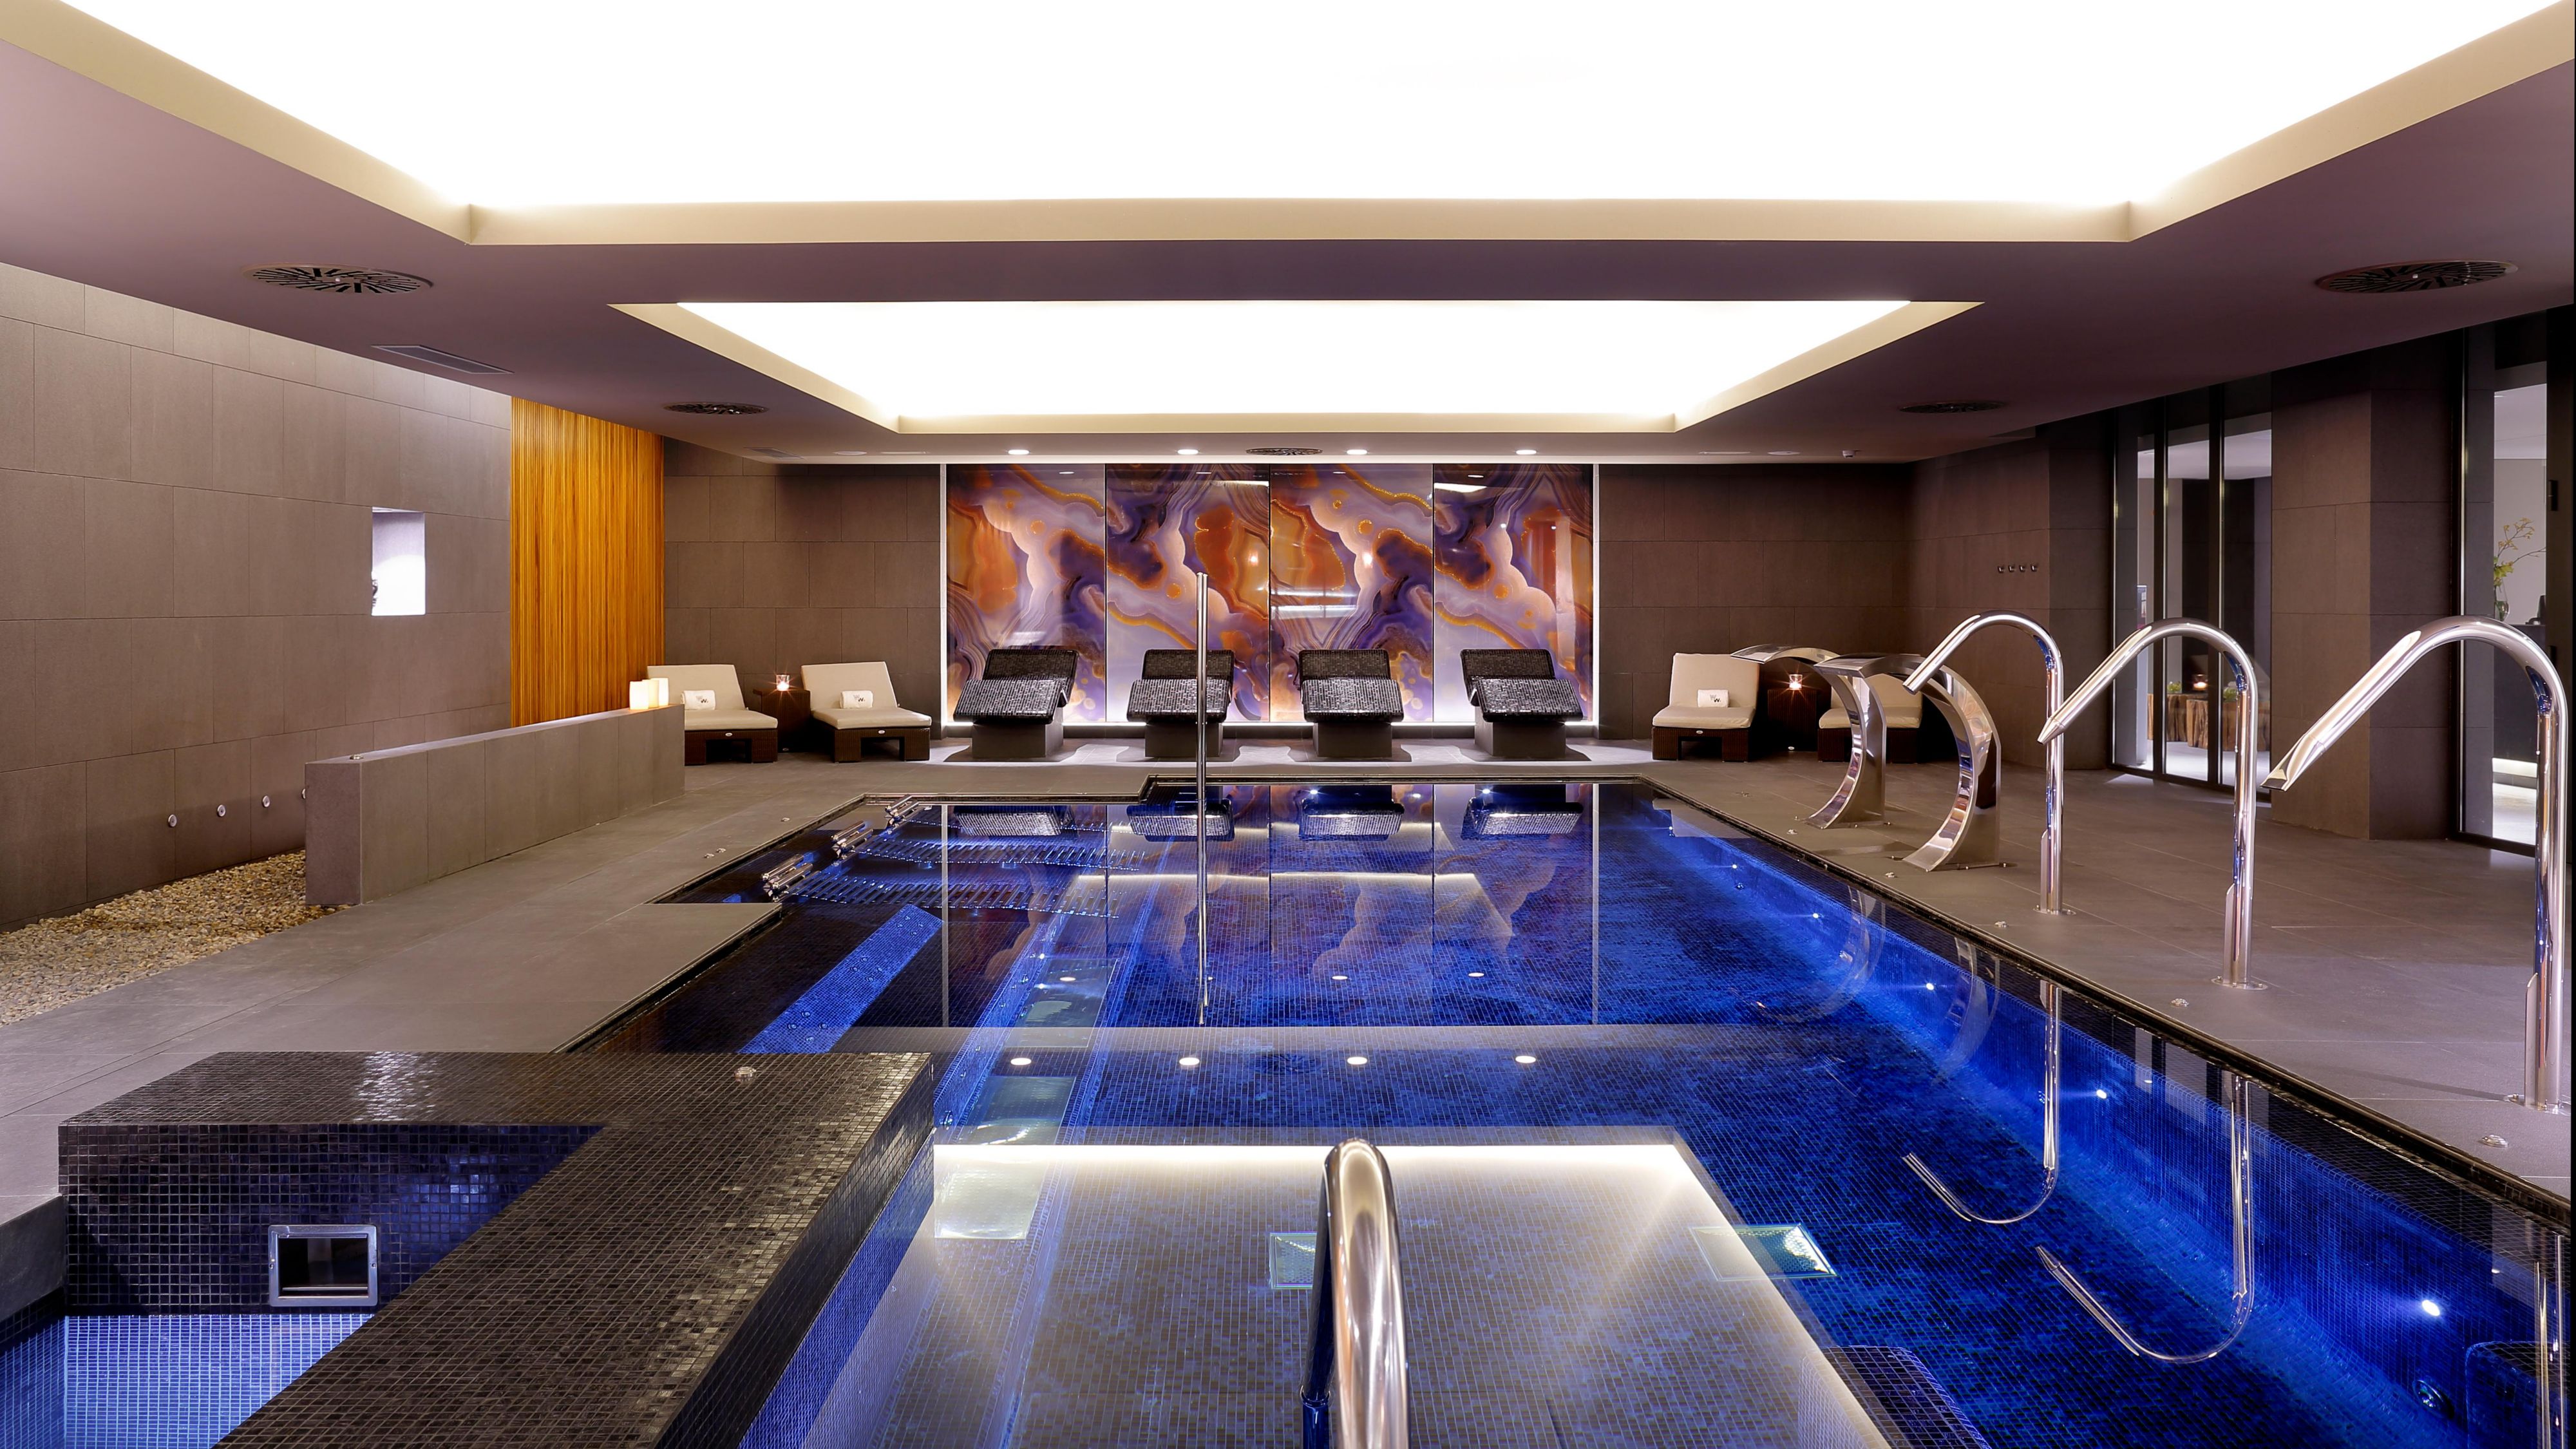 Spa InterContinental package